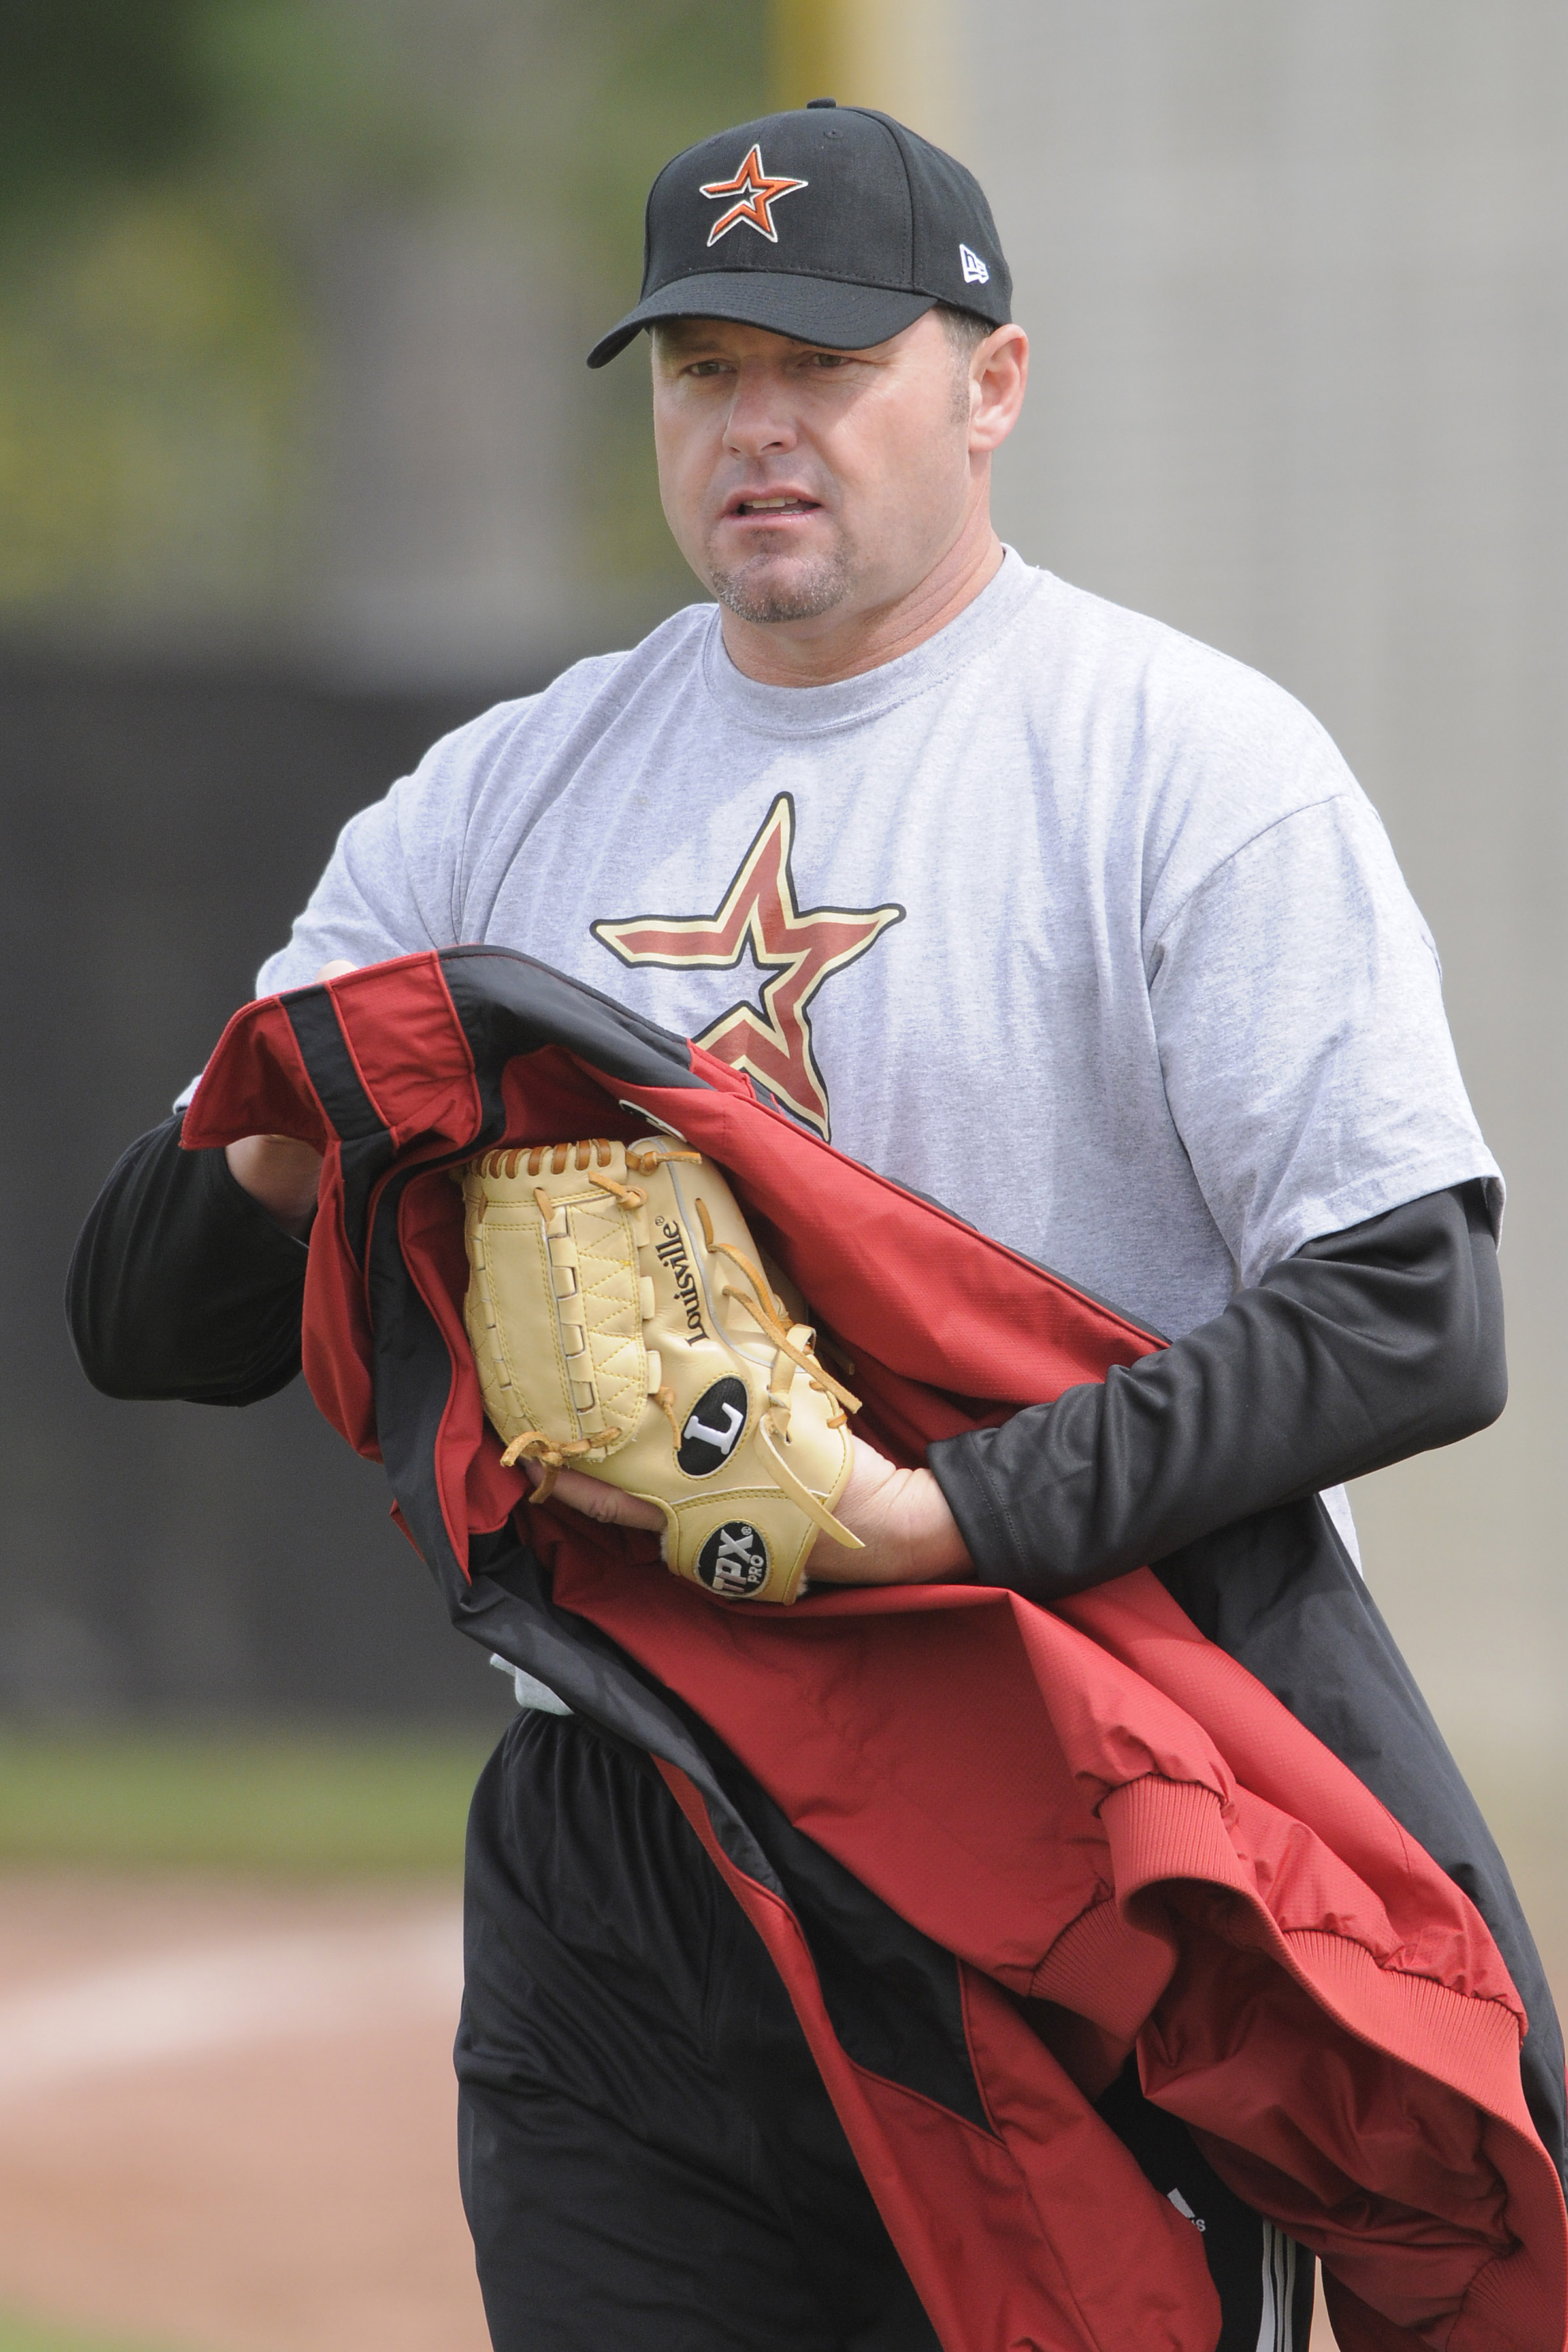 Roger Clemens: 10 Reasons He Should Come Clean Now to Save Himself